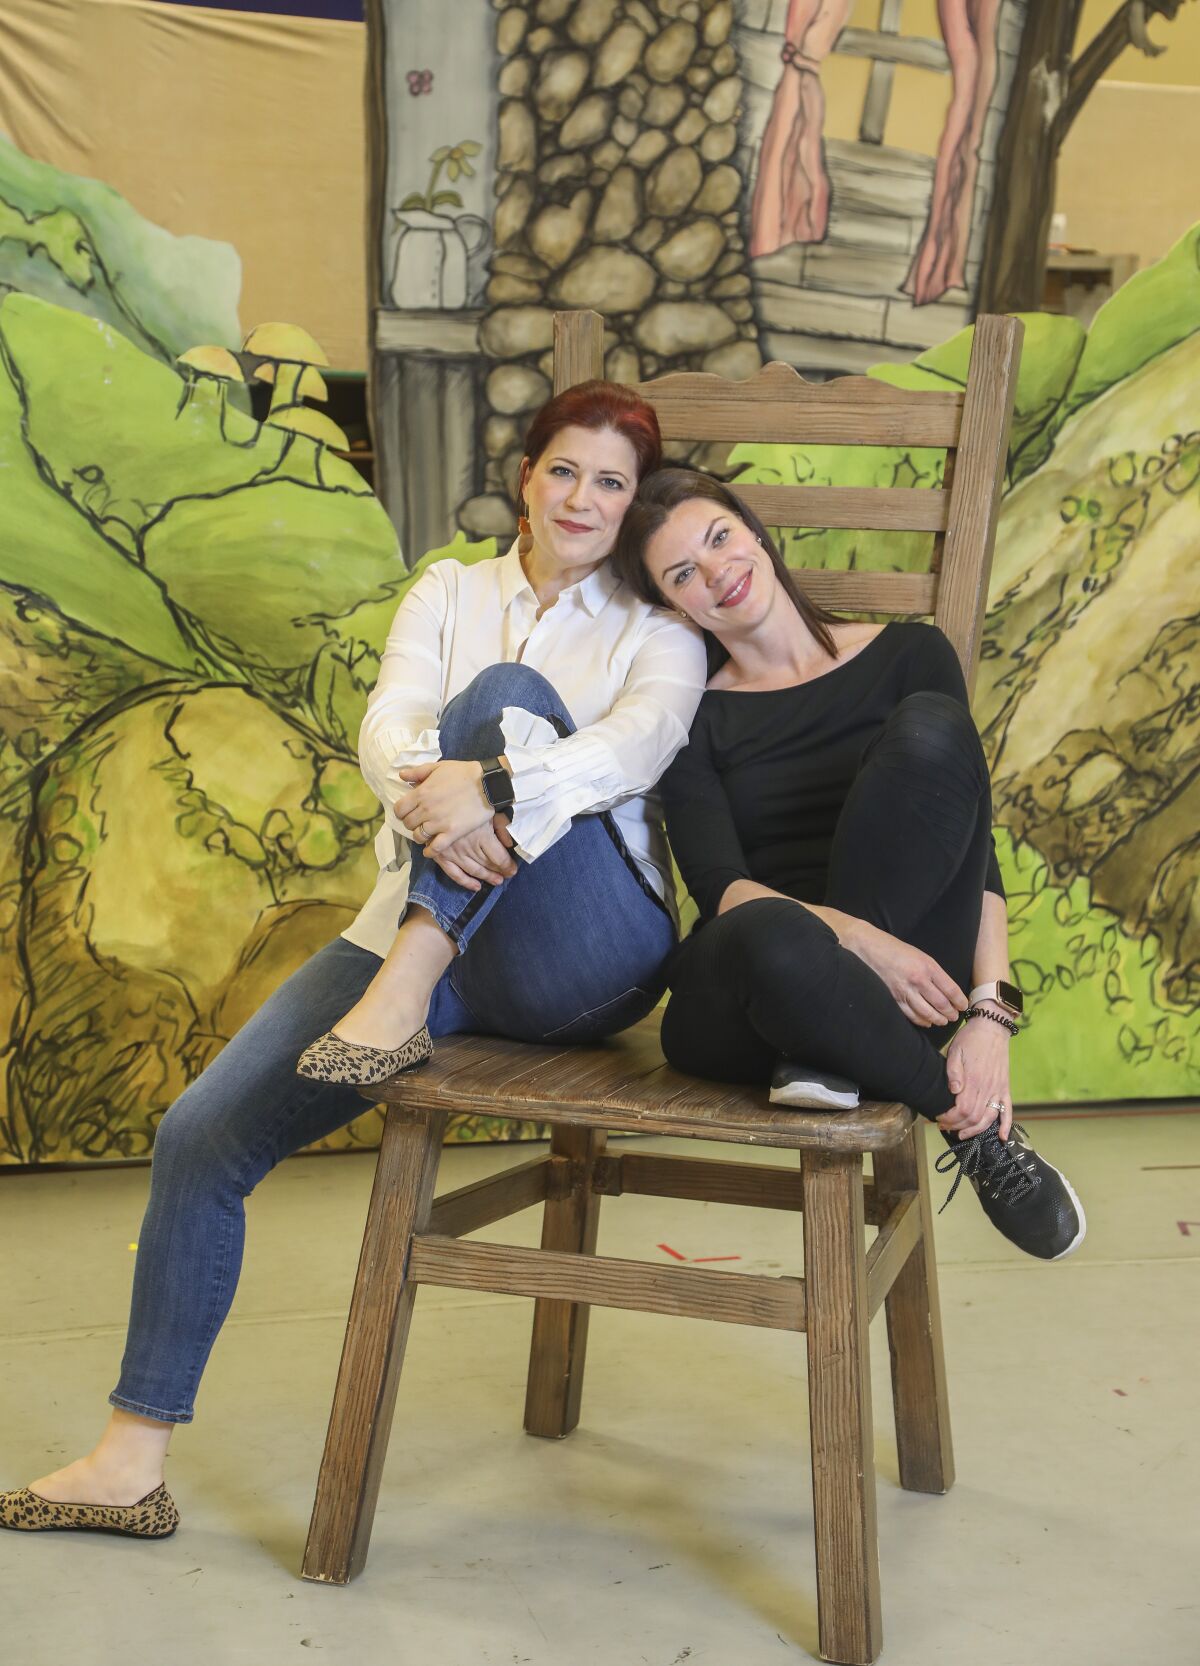 During a rehearsal of San Diego Opera's "Hansel and Gretel" cast members Blythe Gaissert, left, who plays Hansel, and Sara Gartland, right, as Gretel, pose for photos for the production that will open Feb. 8 at the San Diego Civic Theatre.